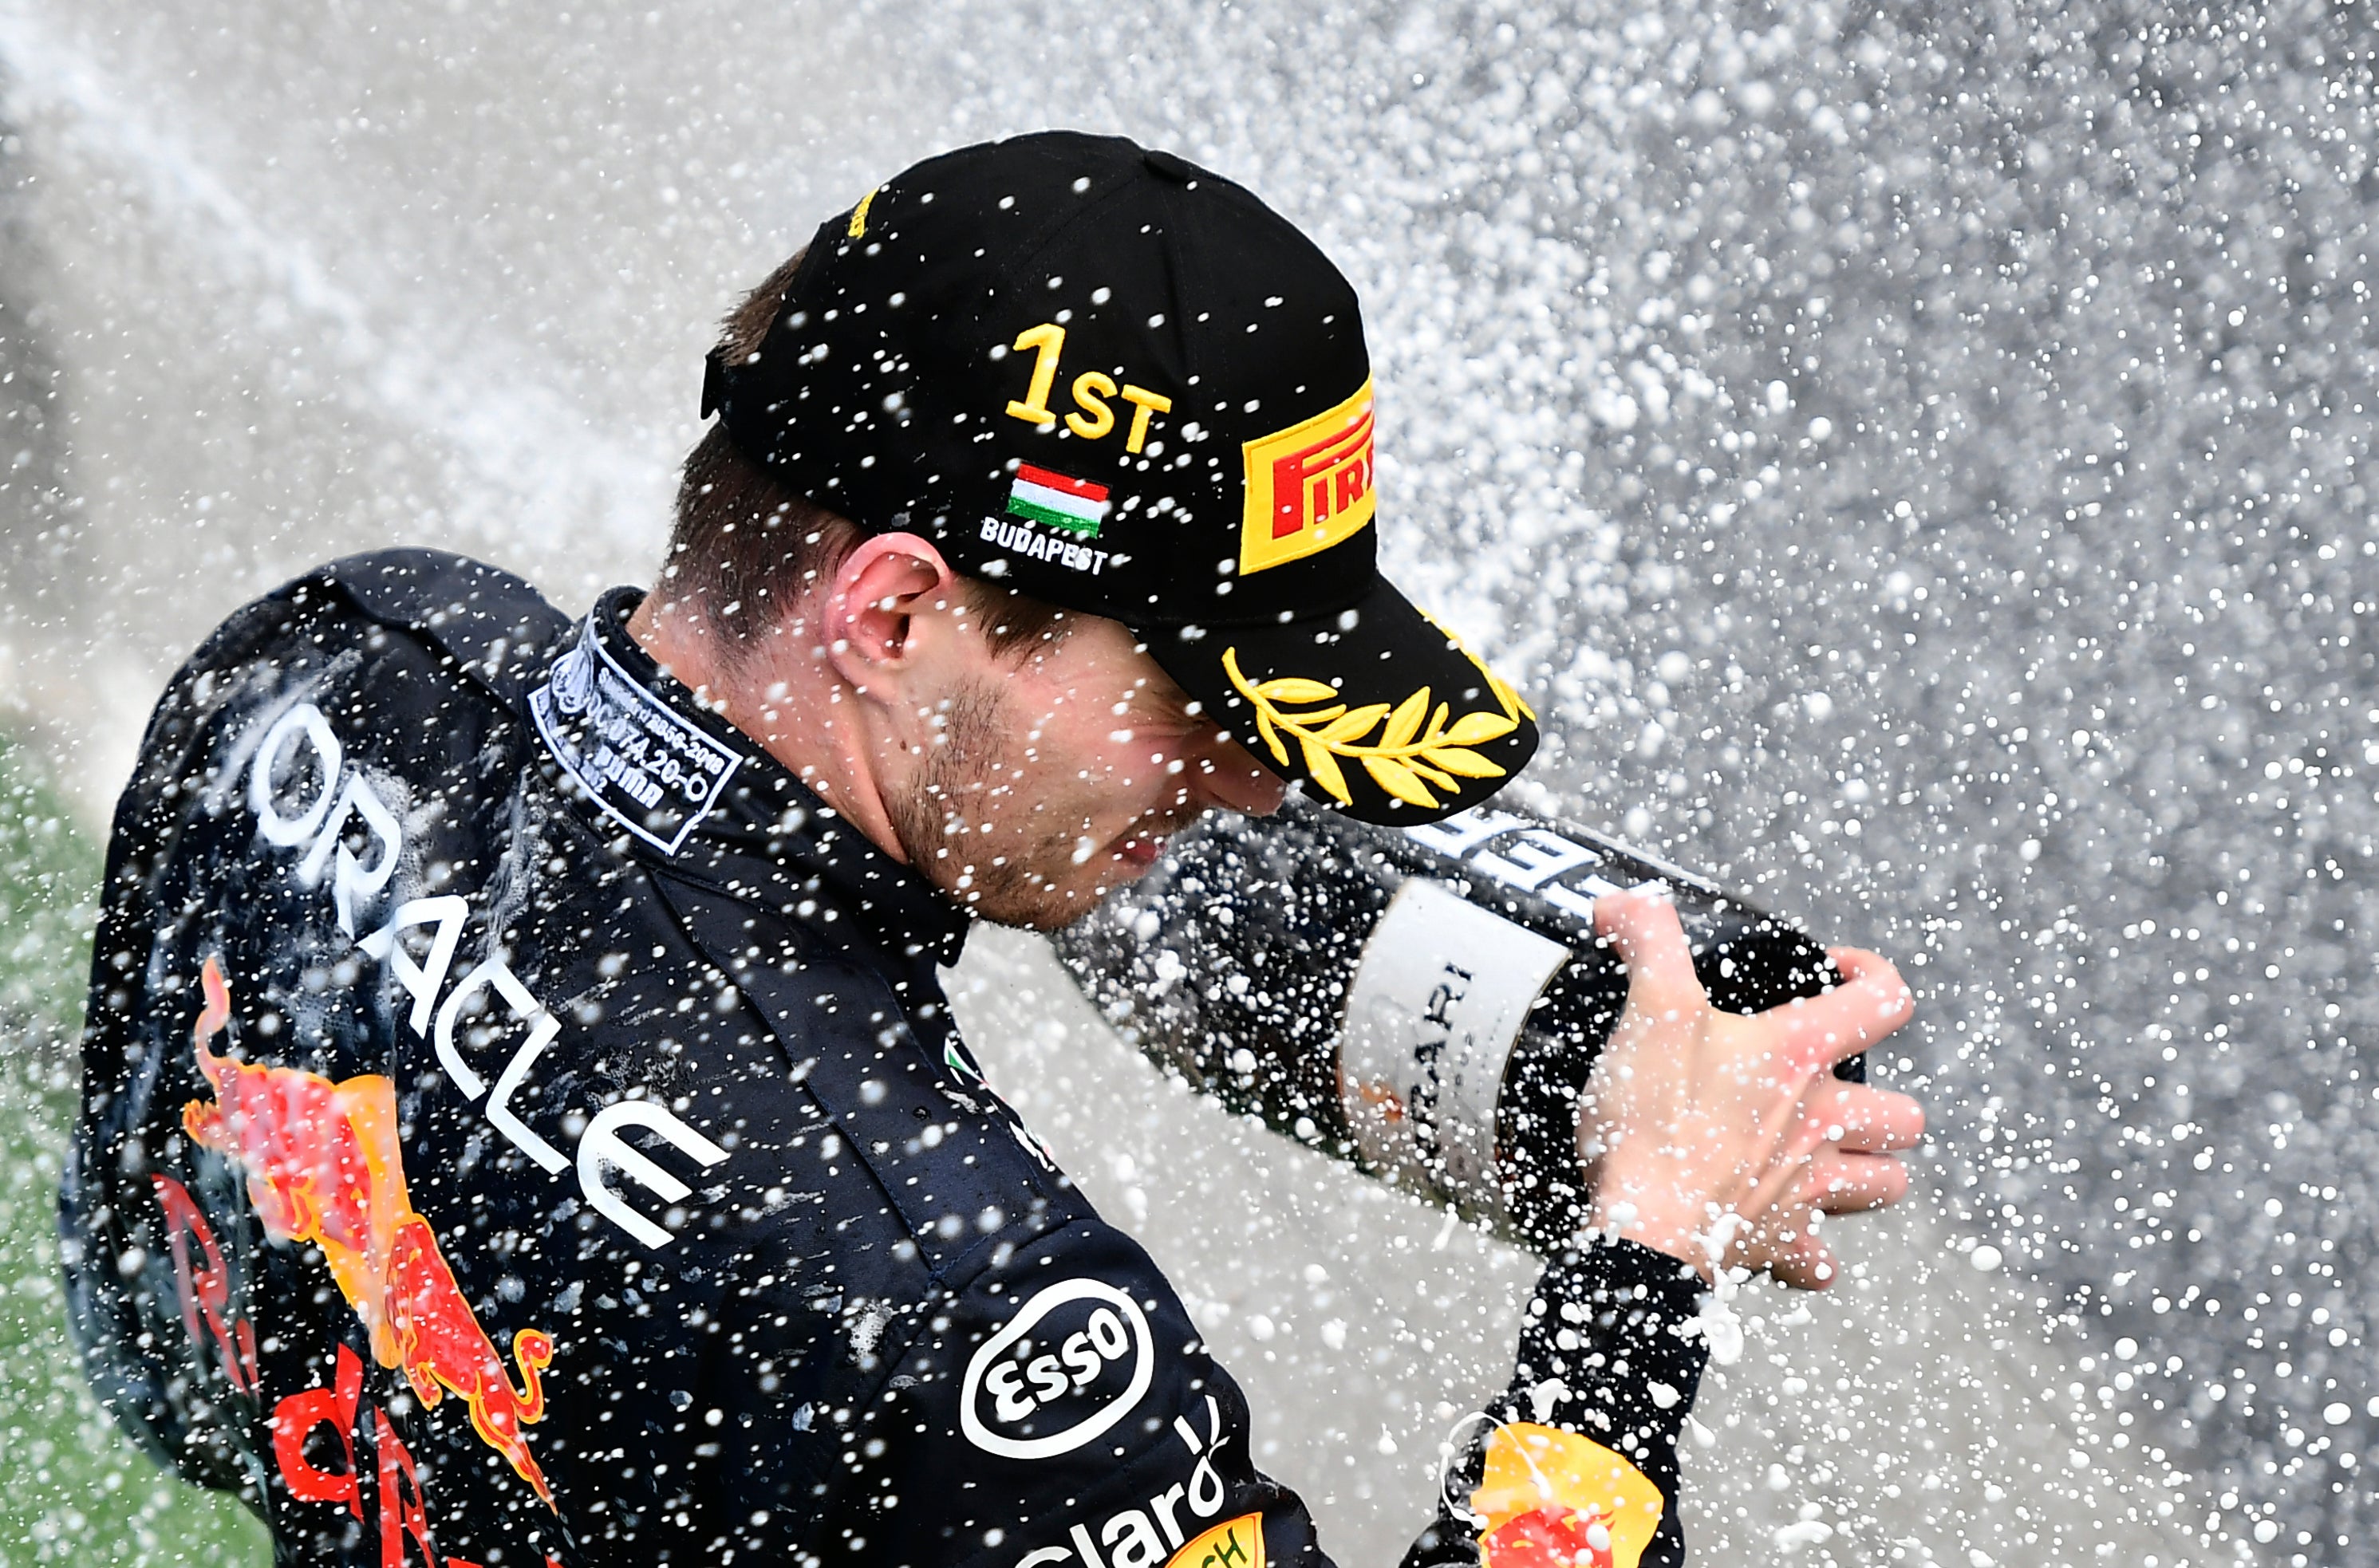 Max Verstappen of the Netherlands sprays champagne on the podium after winning the Hungarian Grand Prix (Anna Szilagyi/AP)